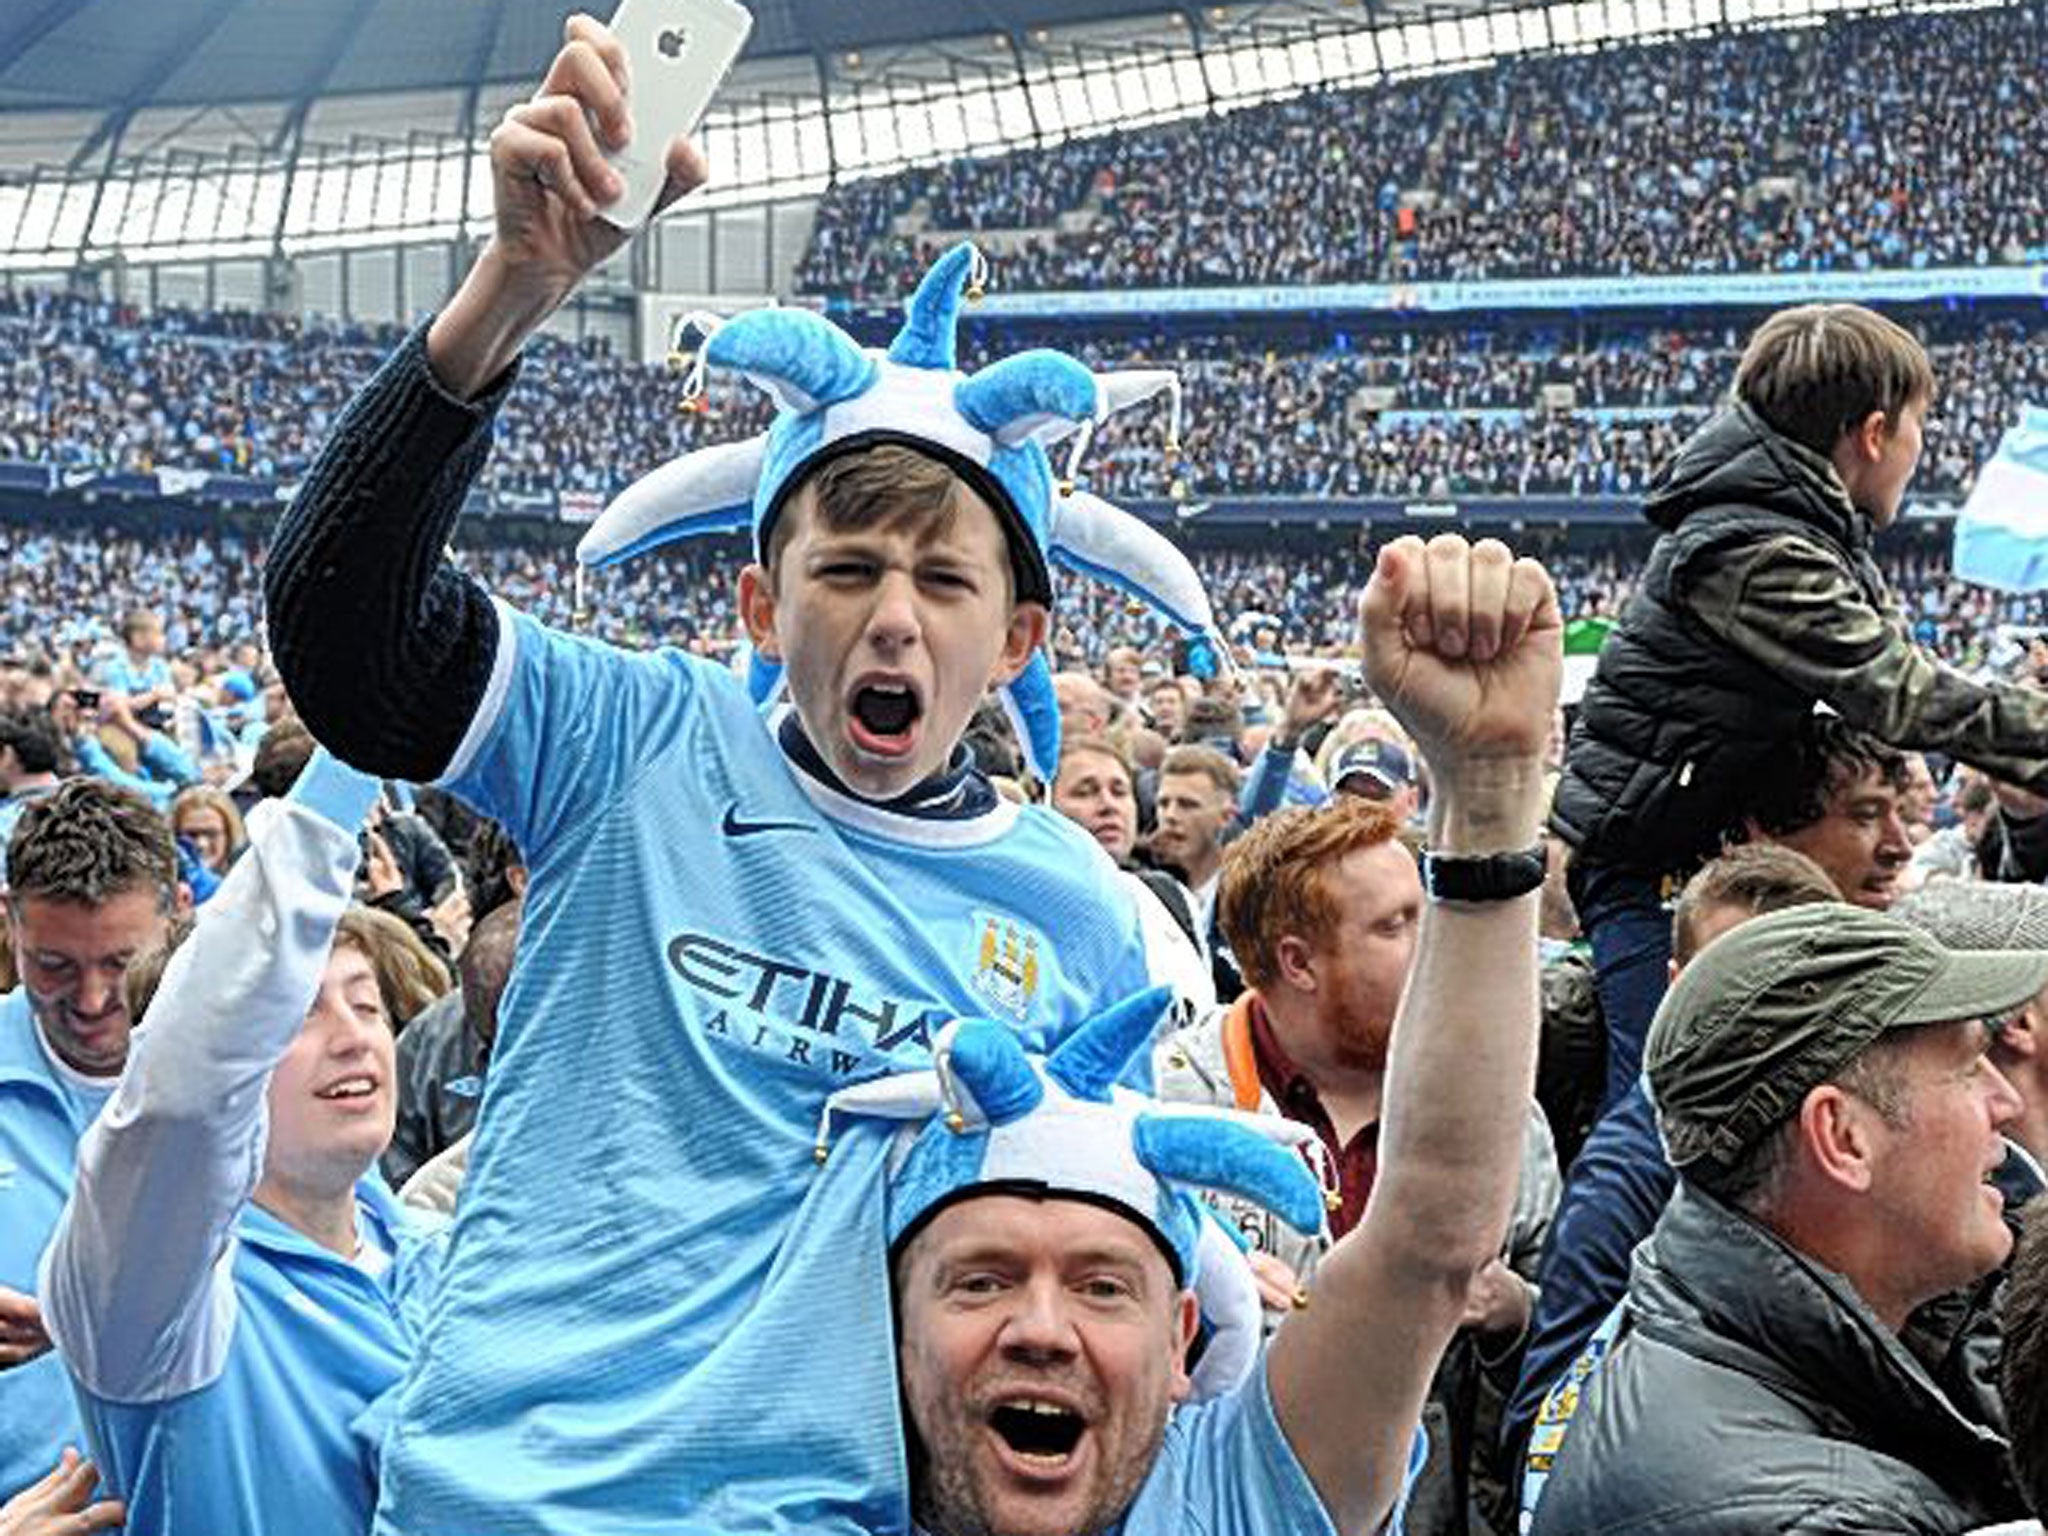 Manchester City fans celebrated their title triumph by flooding on to the pitch at the Etihad Stadium yesterday